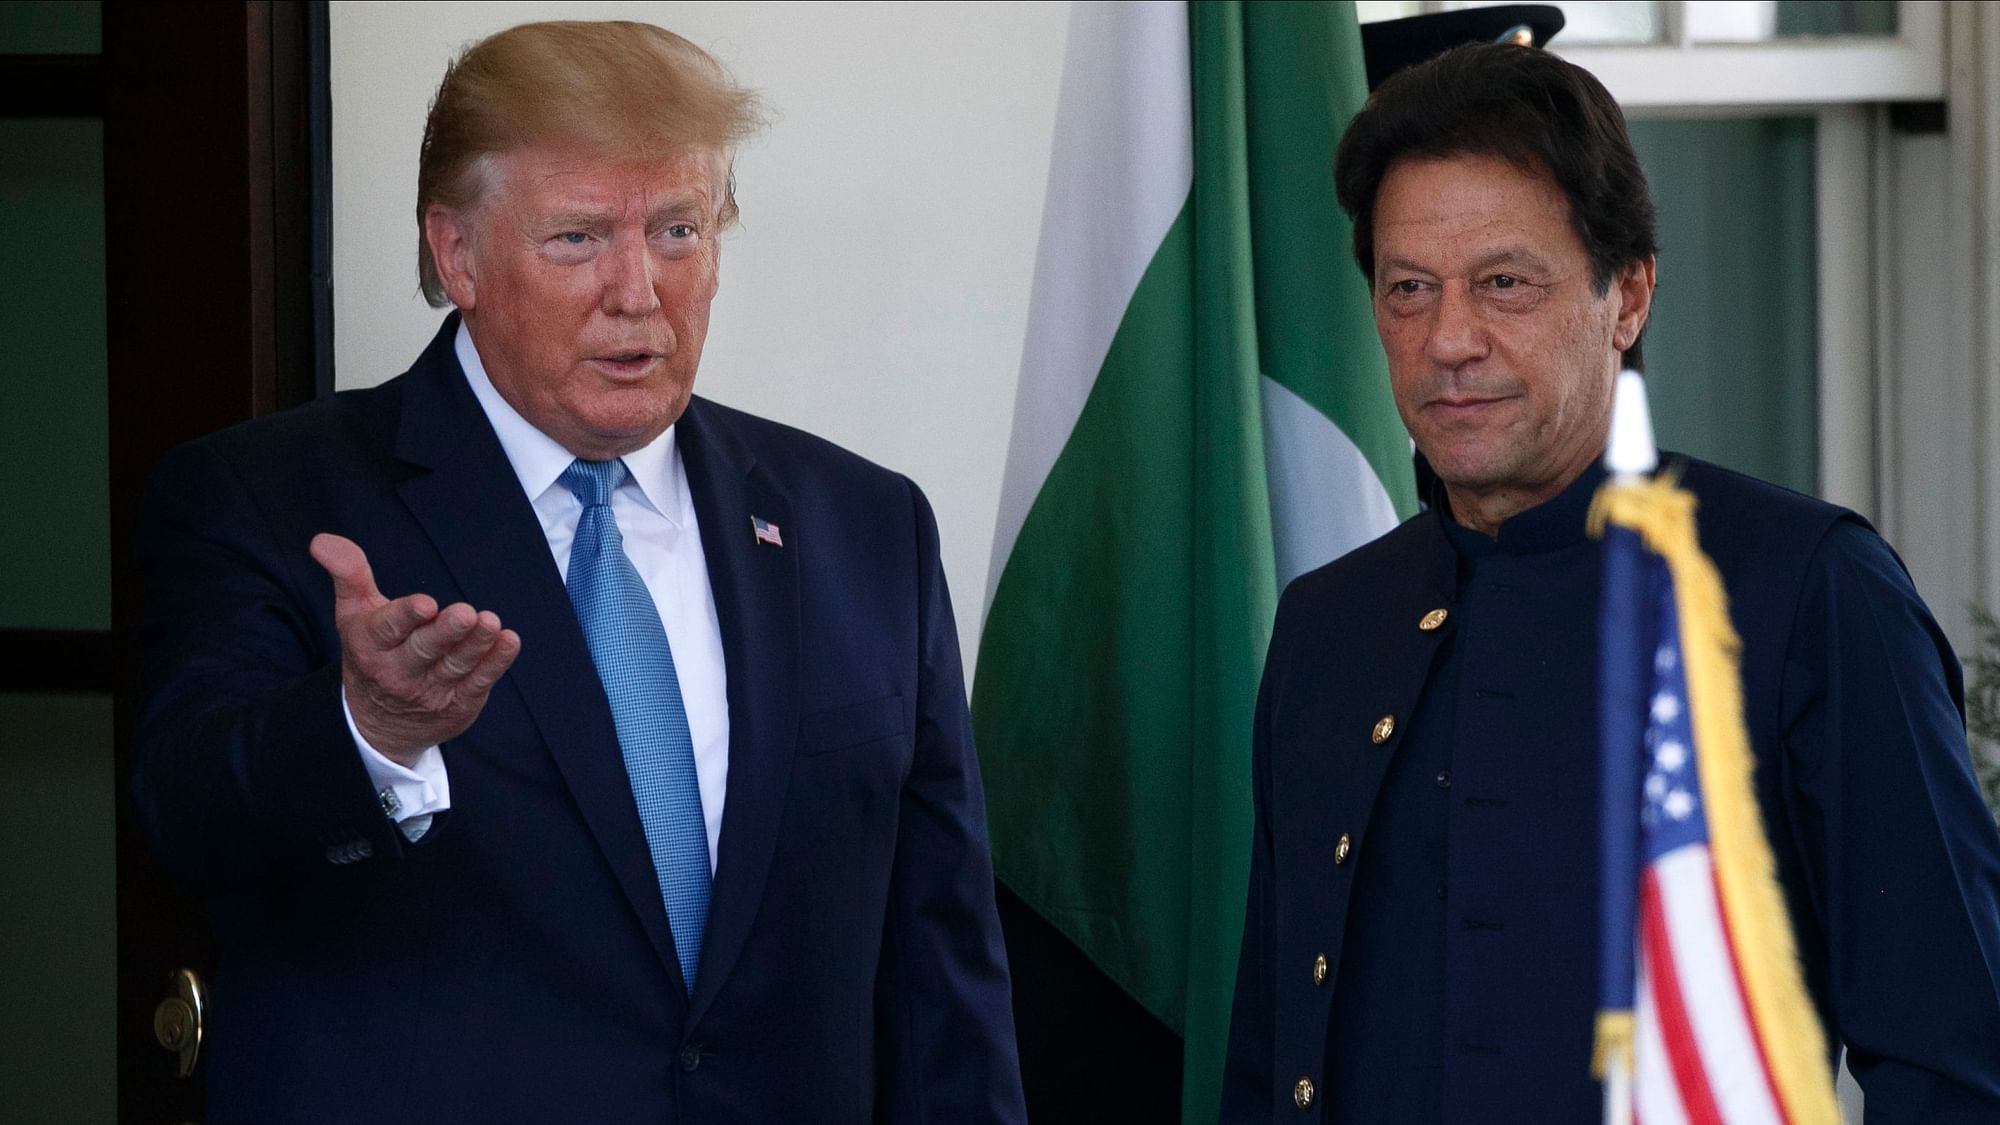 US President Donald Trump welcomes Pakistan PM Imran Khan at the White House.